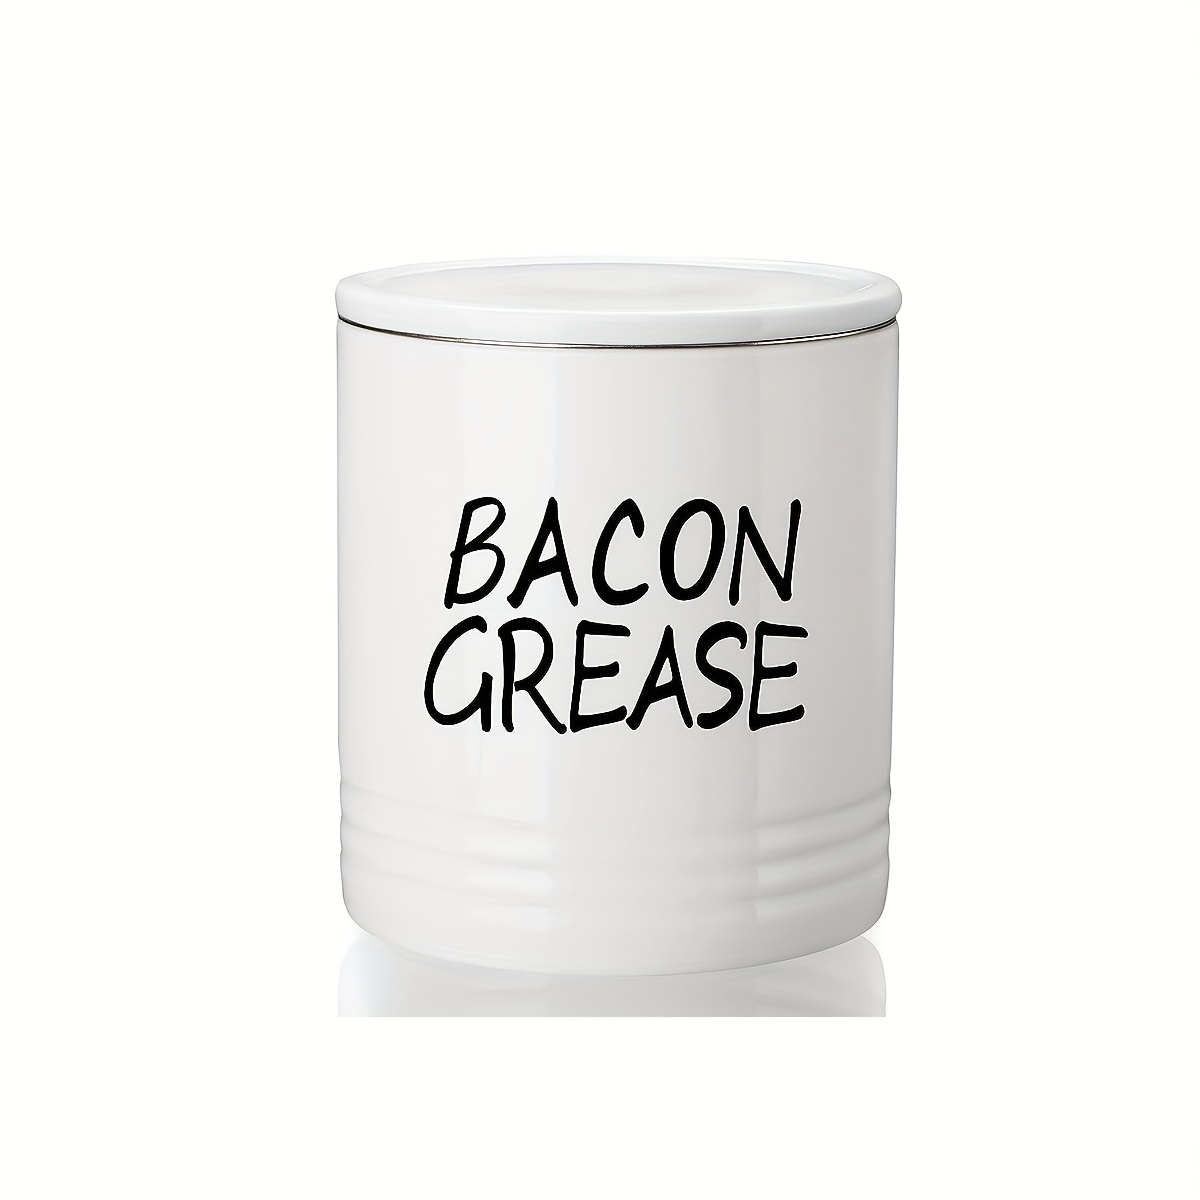 Ceramic Bacon Grease Container With Strainer And Lid, Bacon Grease Keeper, Bacon  Grease Saver With Stainless Strainer, Bacon Grease Oil Container, Oil  Storage Can, Porcelain Fat Filter Container, Kitchen Decor, Chrismas  Halloween